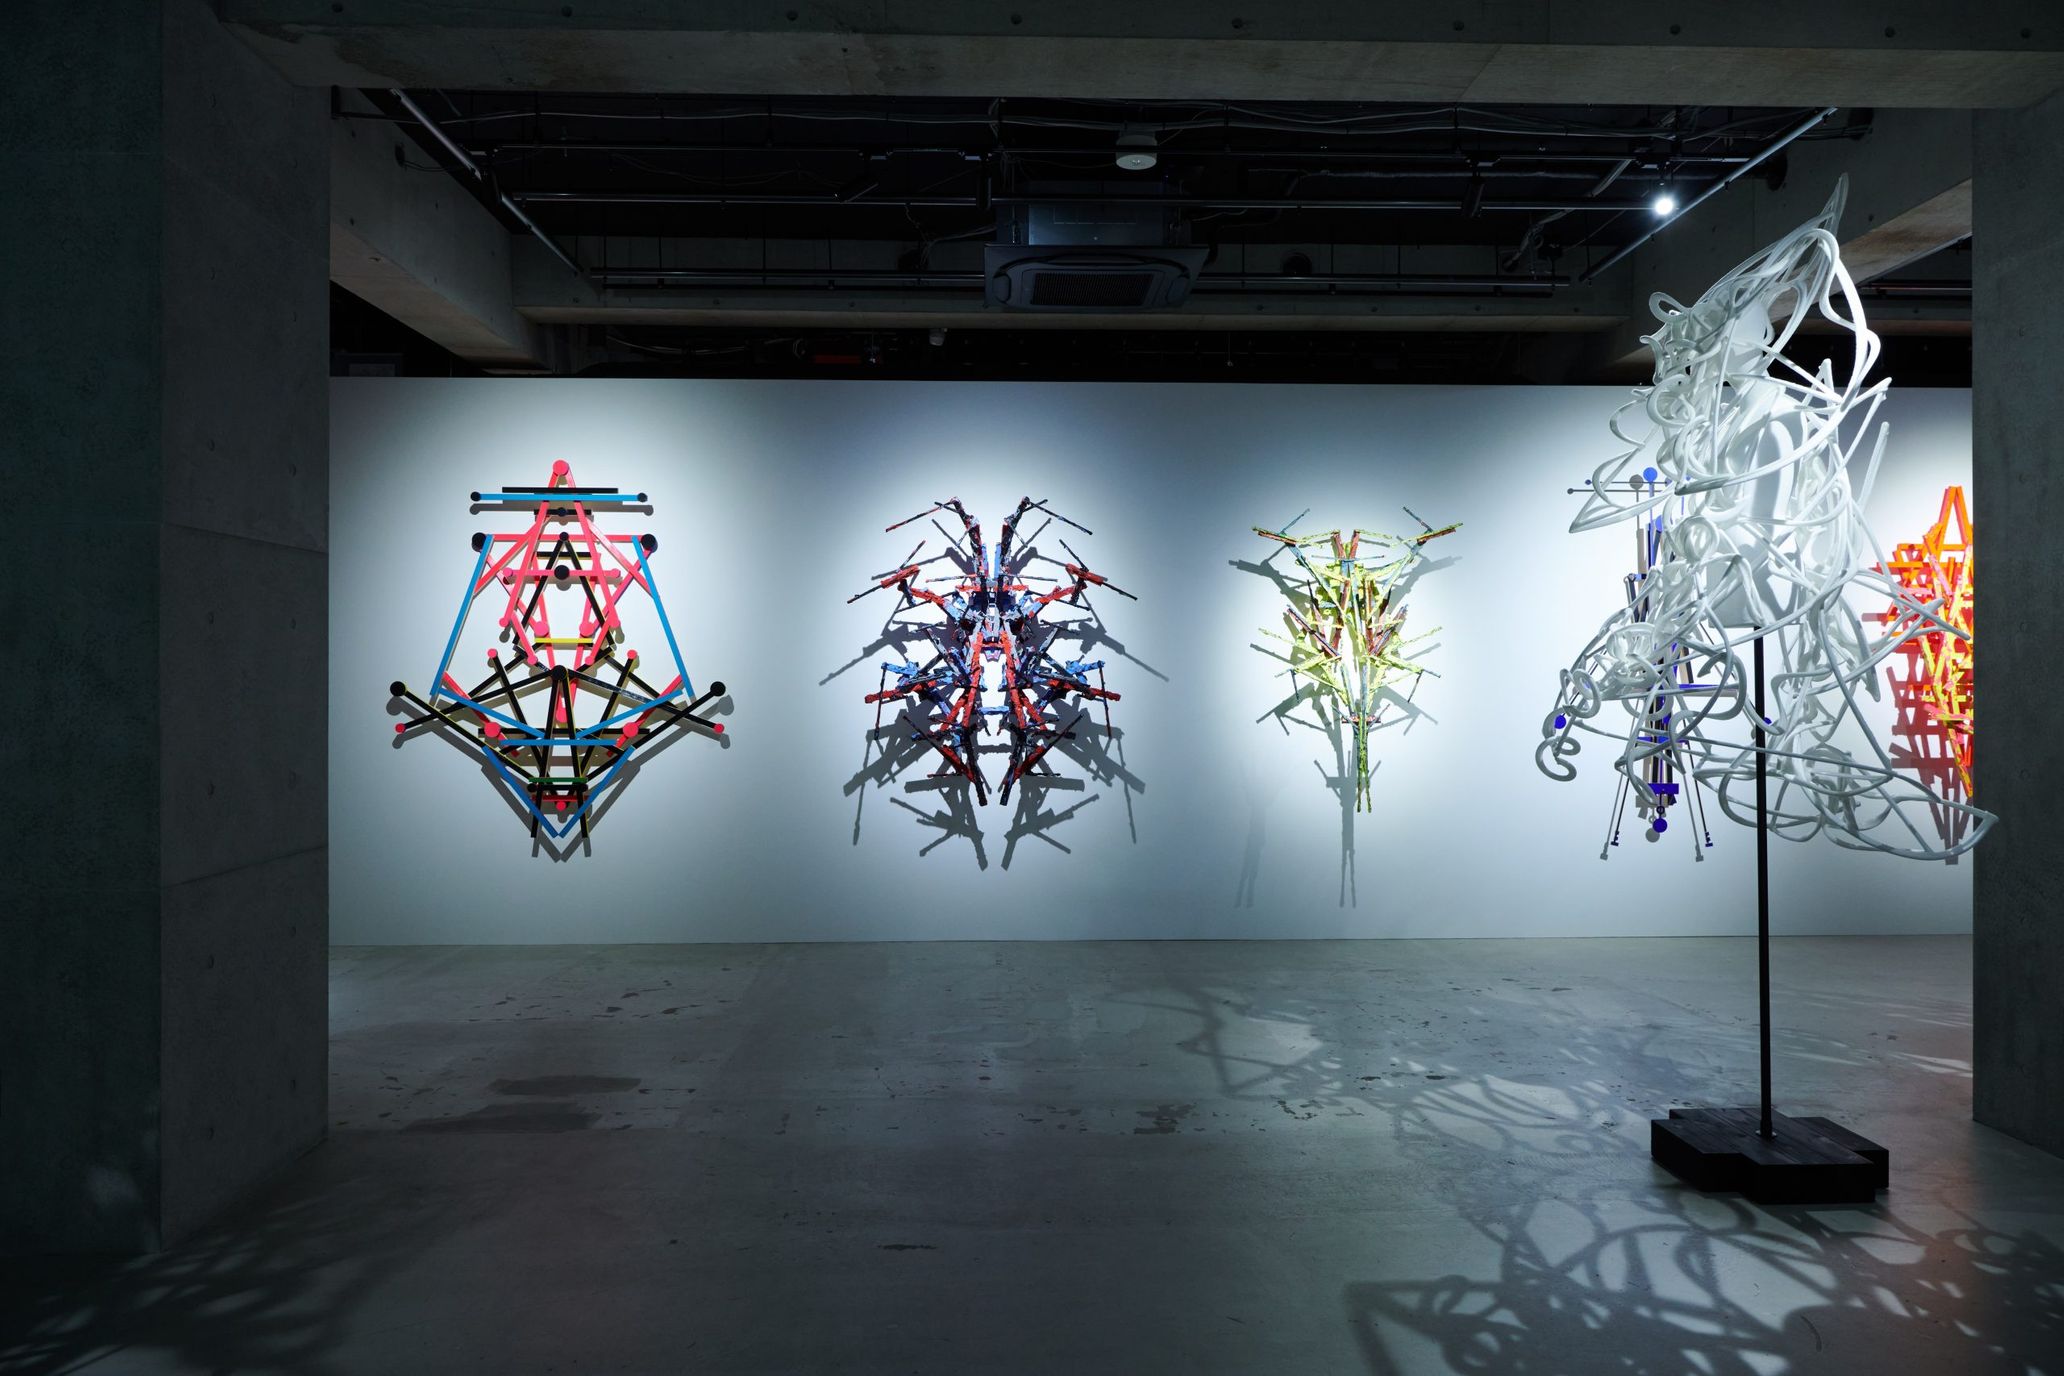 Interview with Fashion Designer Ryunosuke Okazaki: On Vital Instincts Expressed through Symmetrical Forms and Solo Sculpture Exhibition “002” in Resonance with Prayer